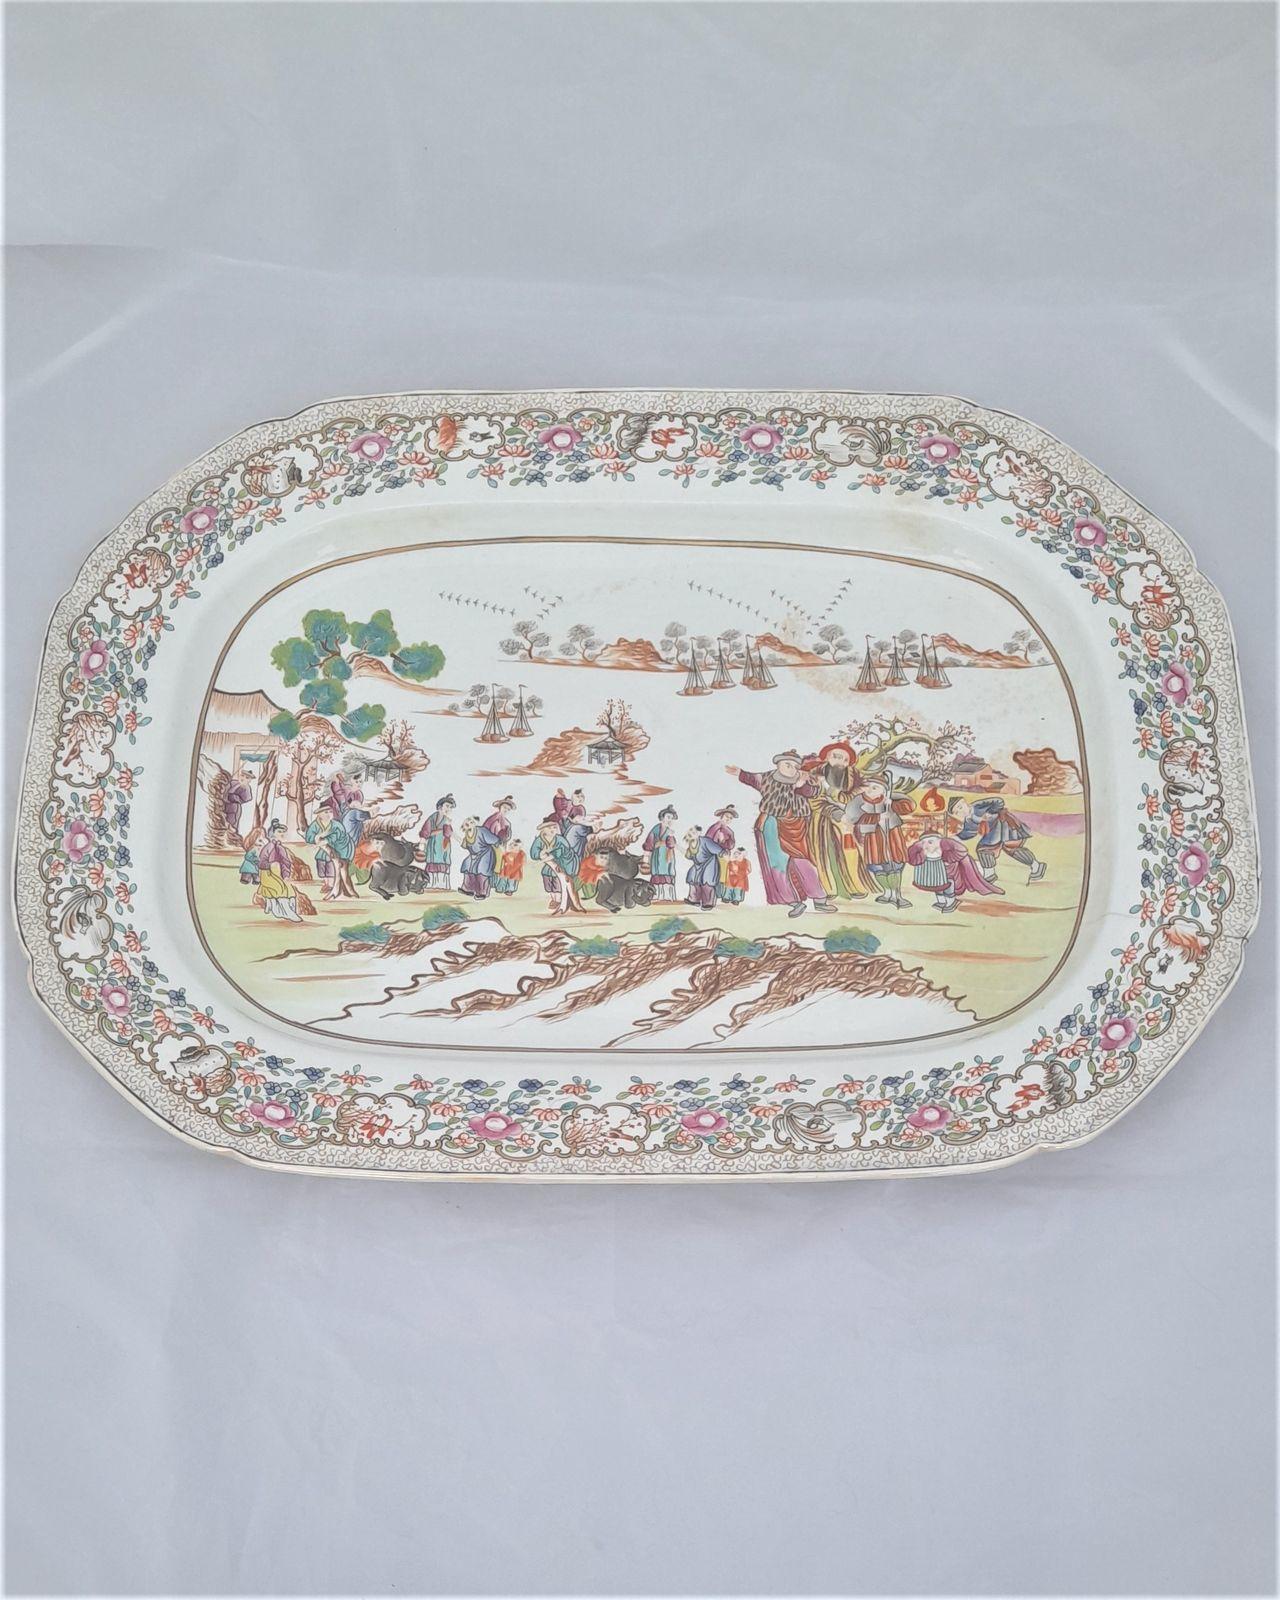 Large Antique Porcelain Platter Transferware Chinoiserie Harbour Scene pattern circa 1820 18th century Qing Chinese Style 56 cm long 41 cm wide 3.7 kg